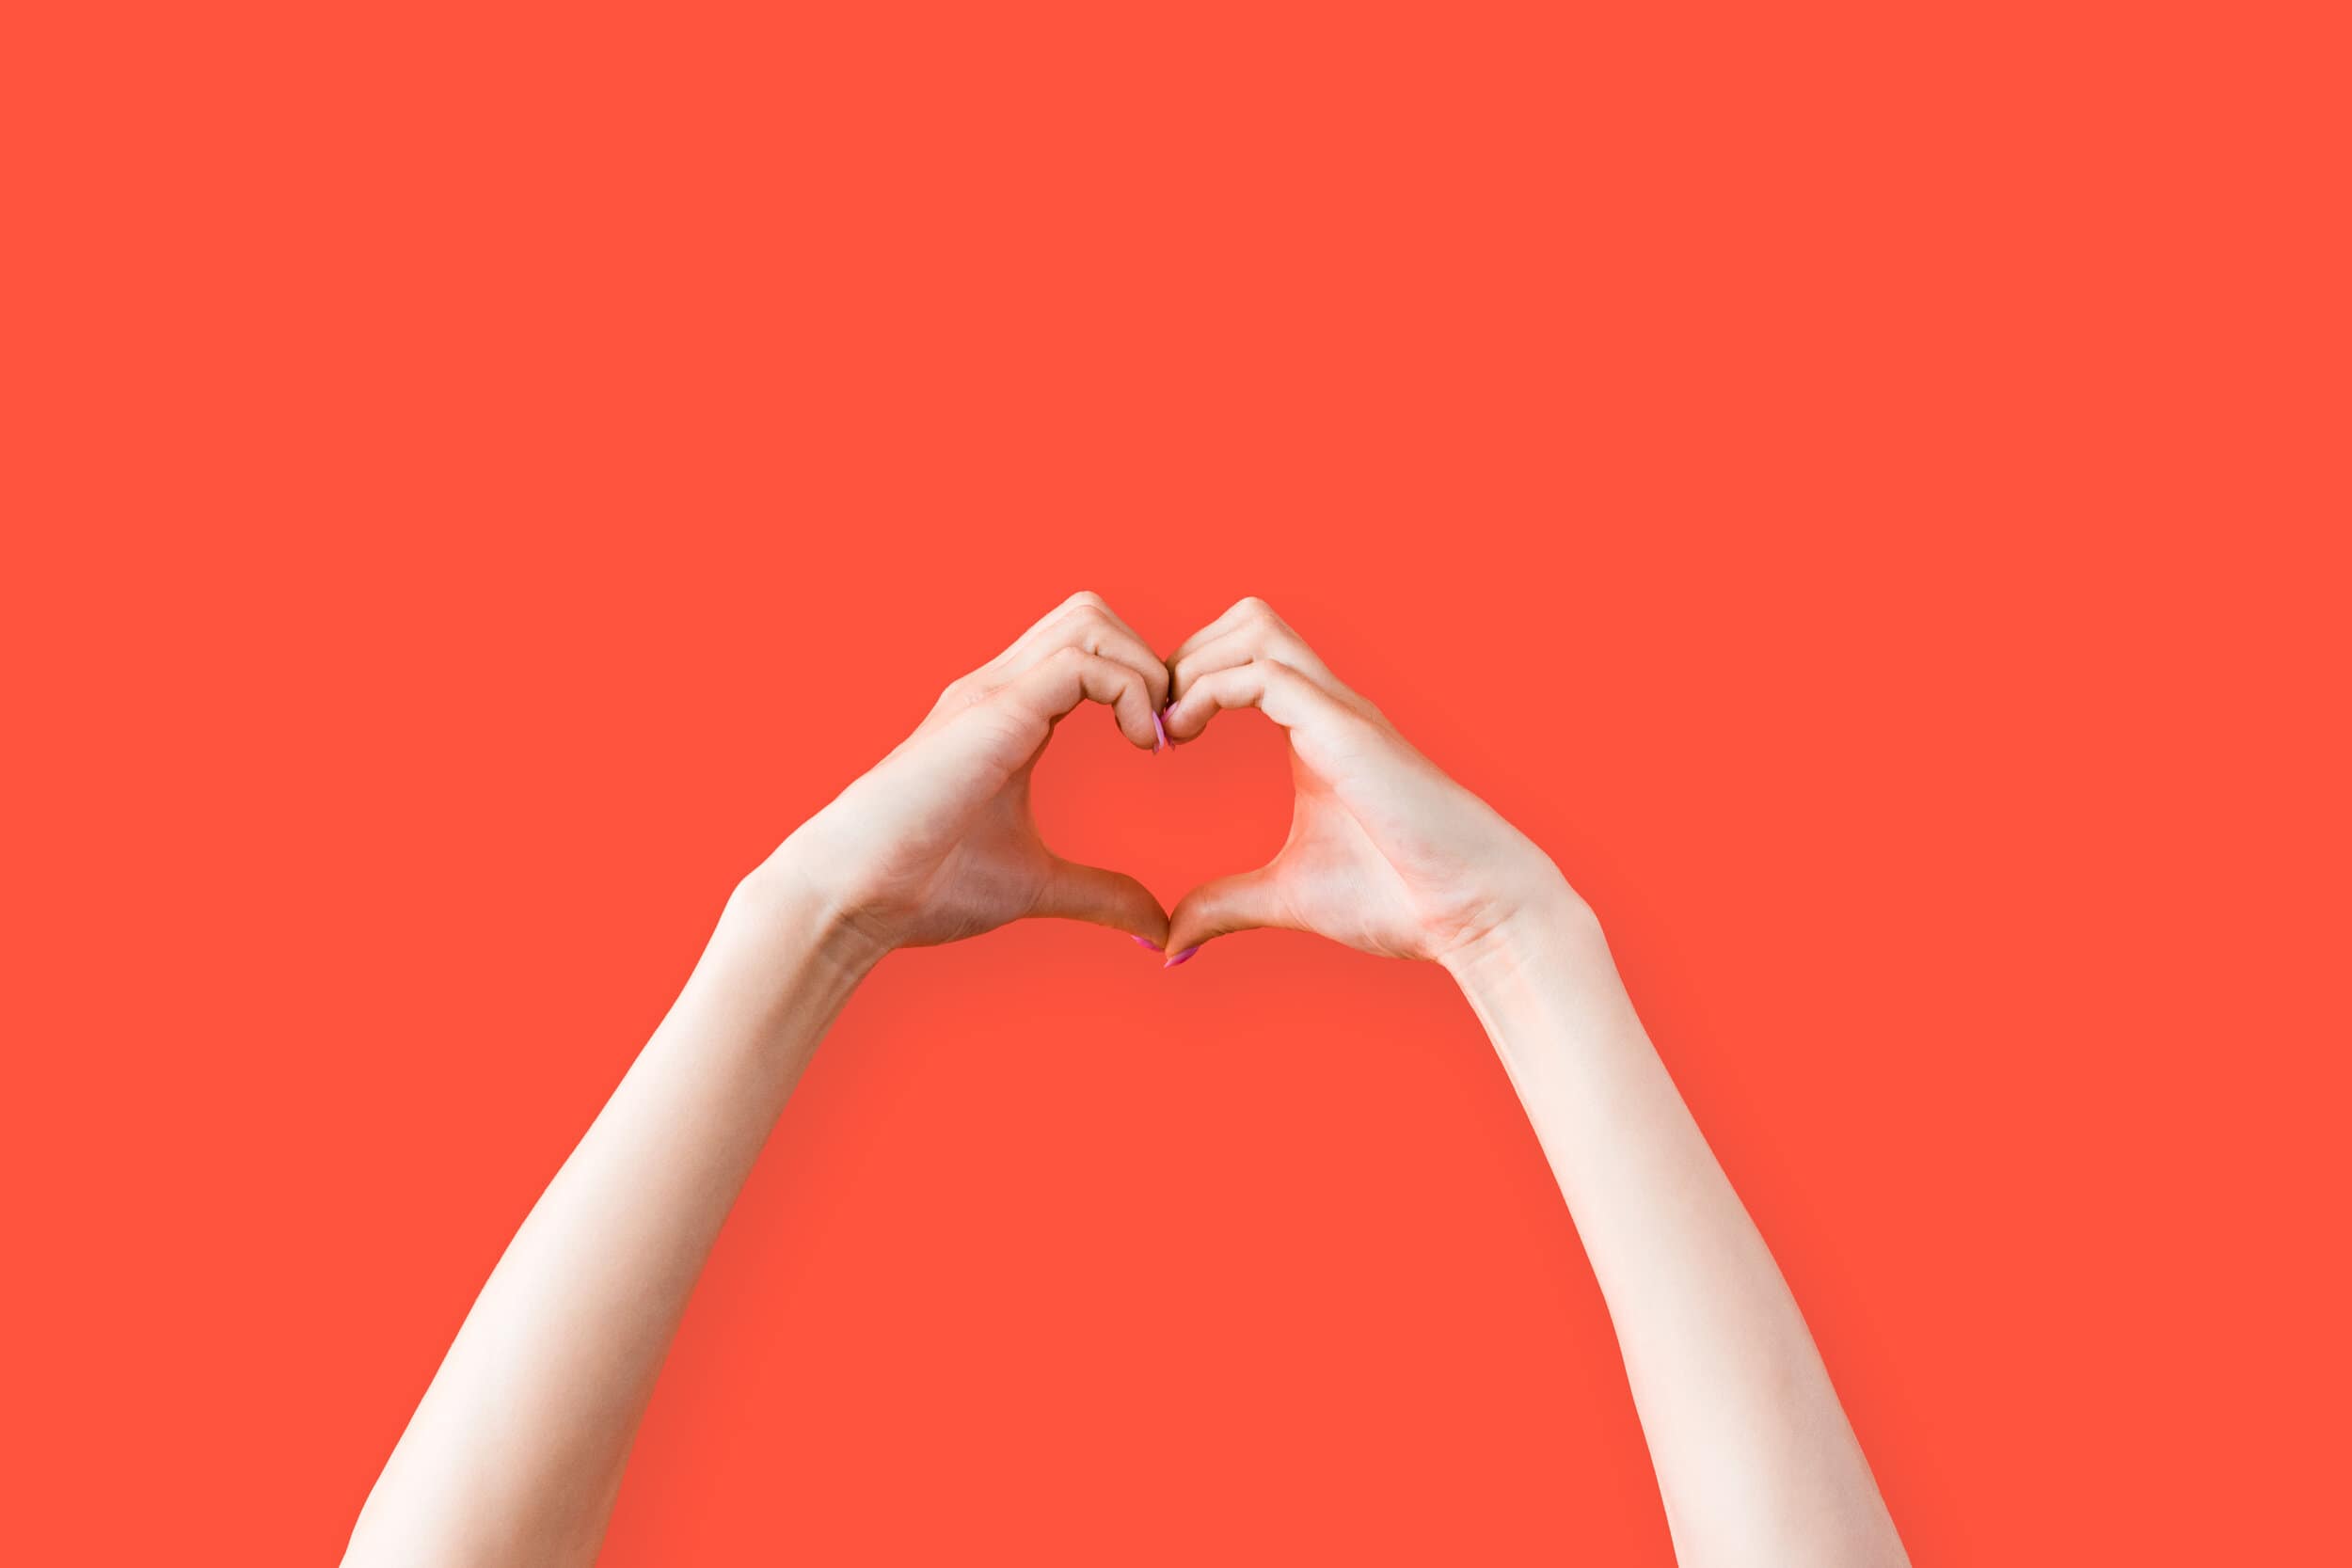 Female hands making a heart in front of a red background - open to love.